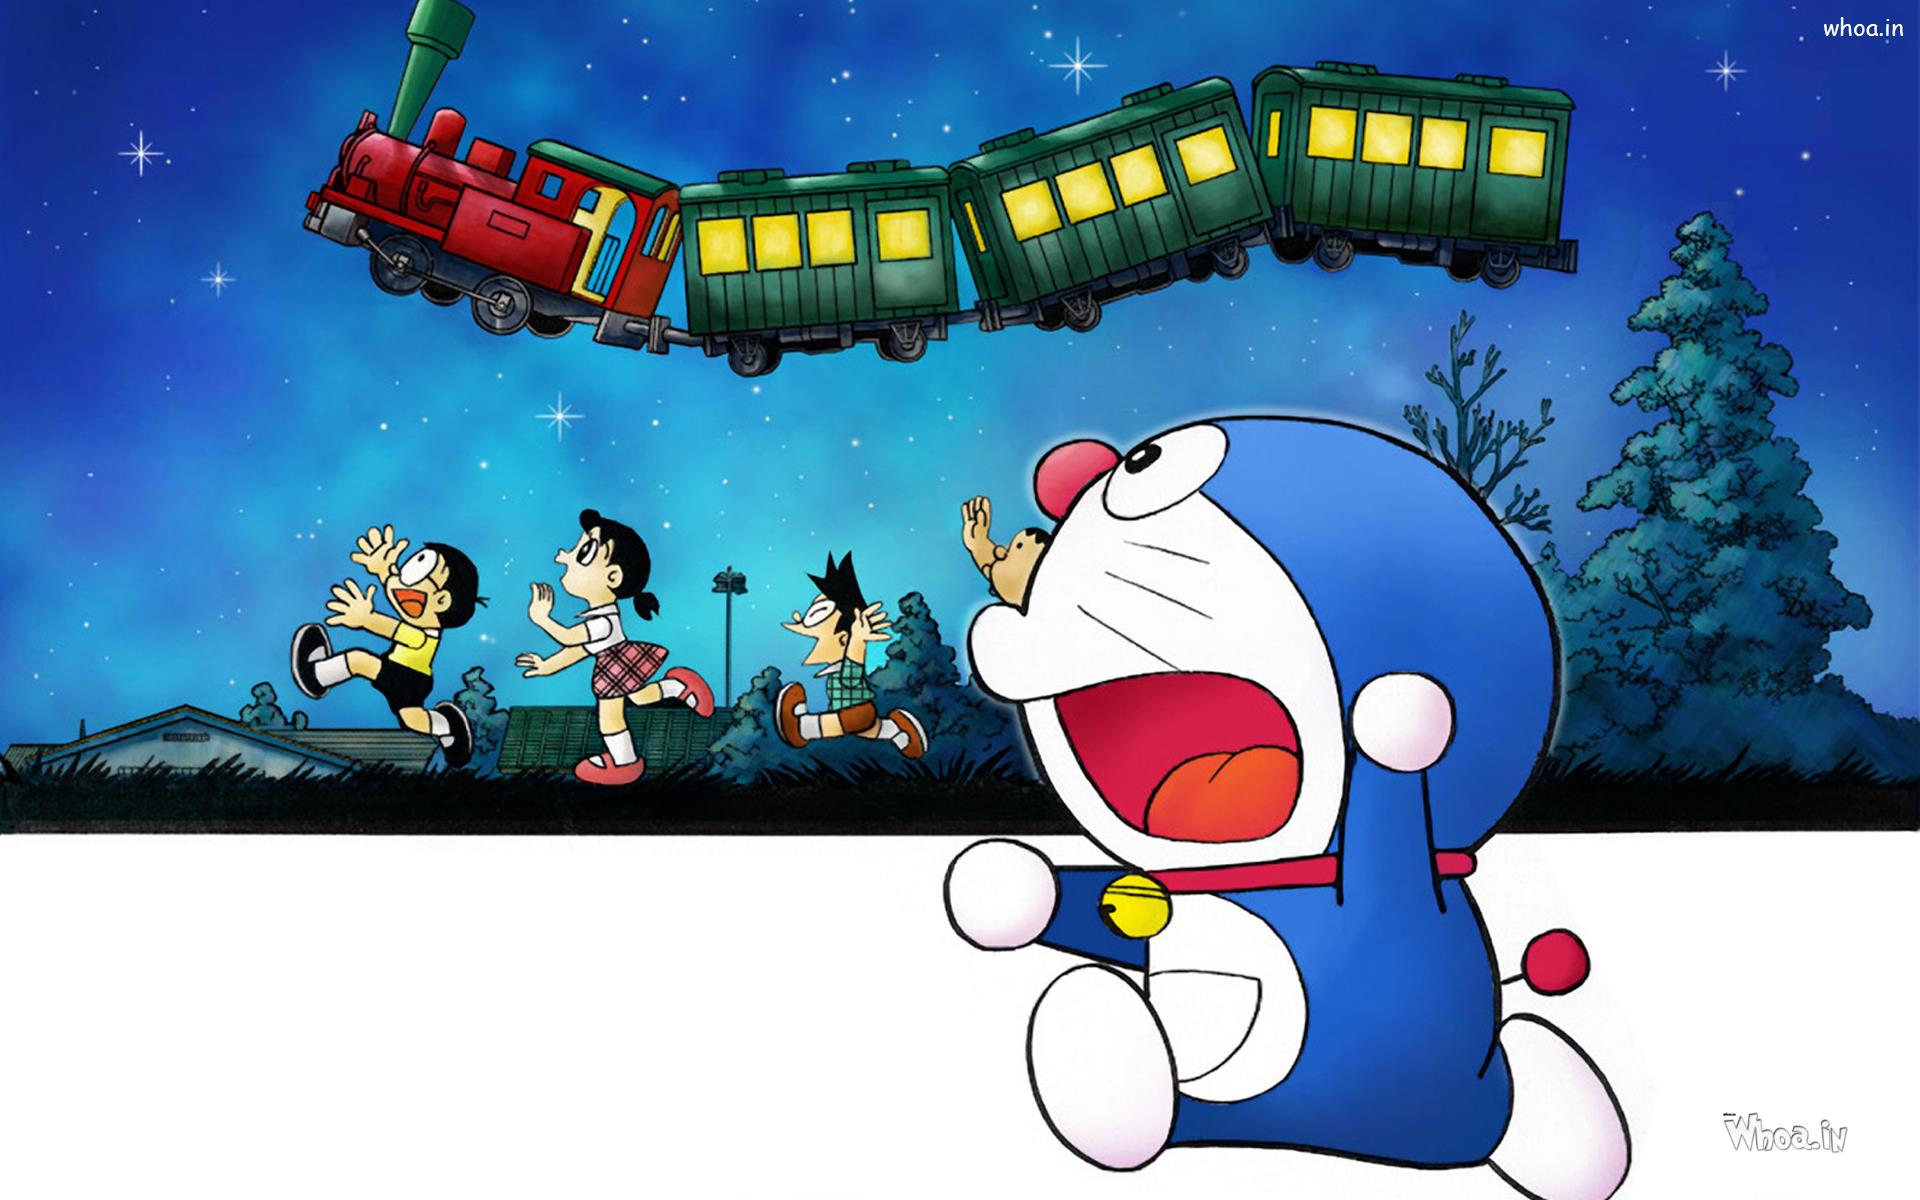 Doraemon And Other Cartoon Character Reach To Flying Train